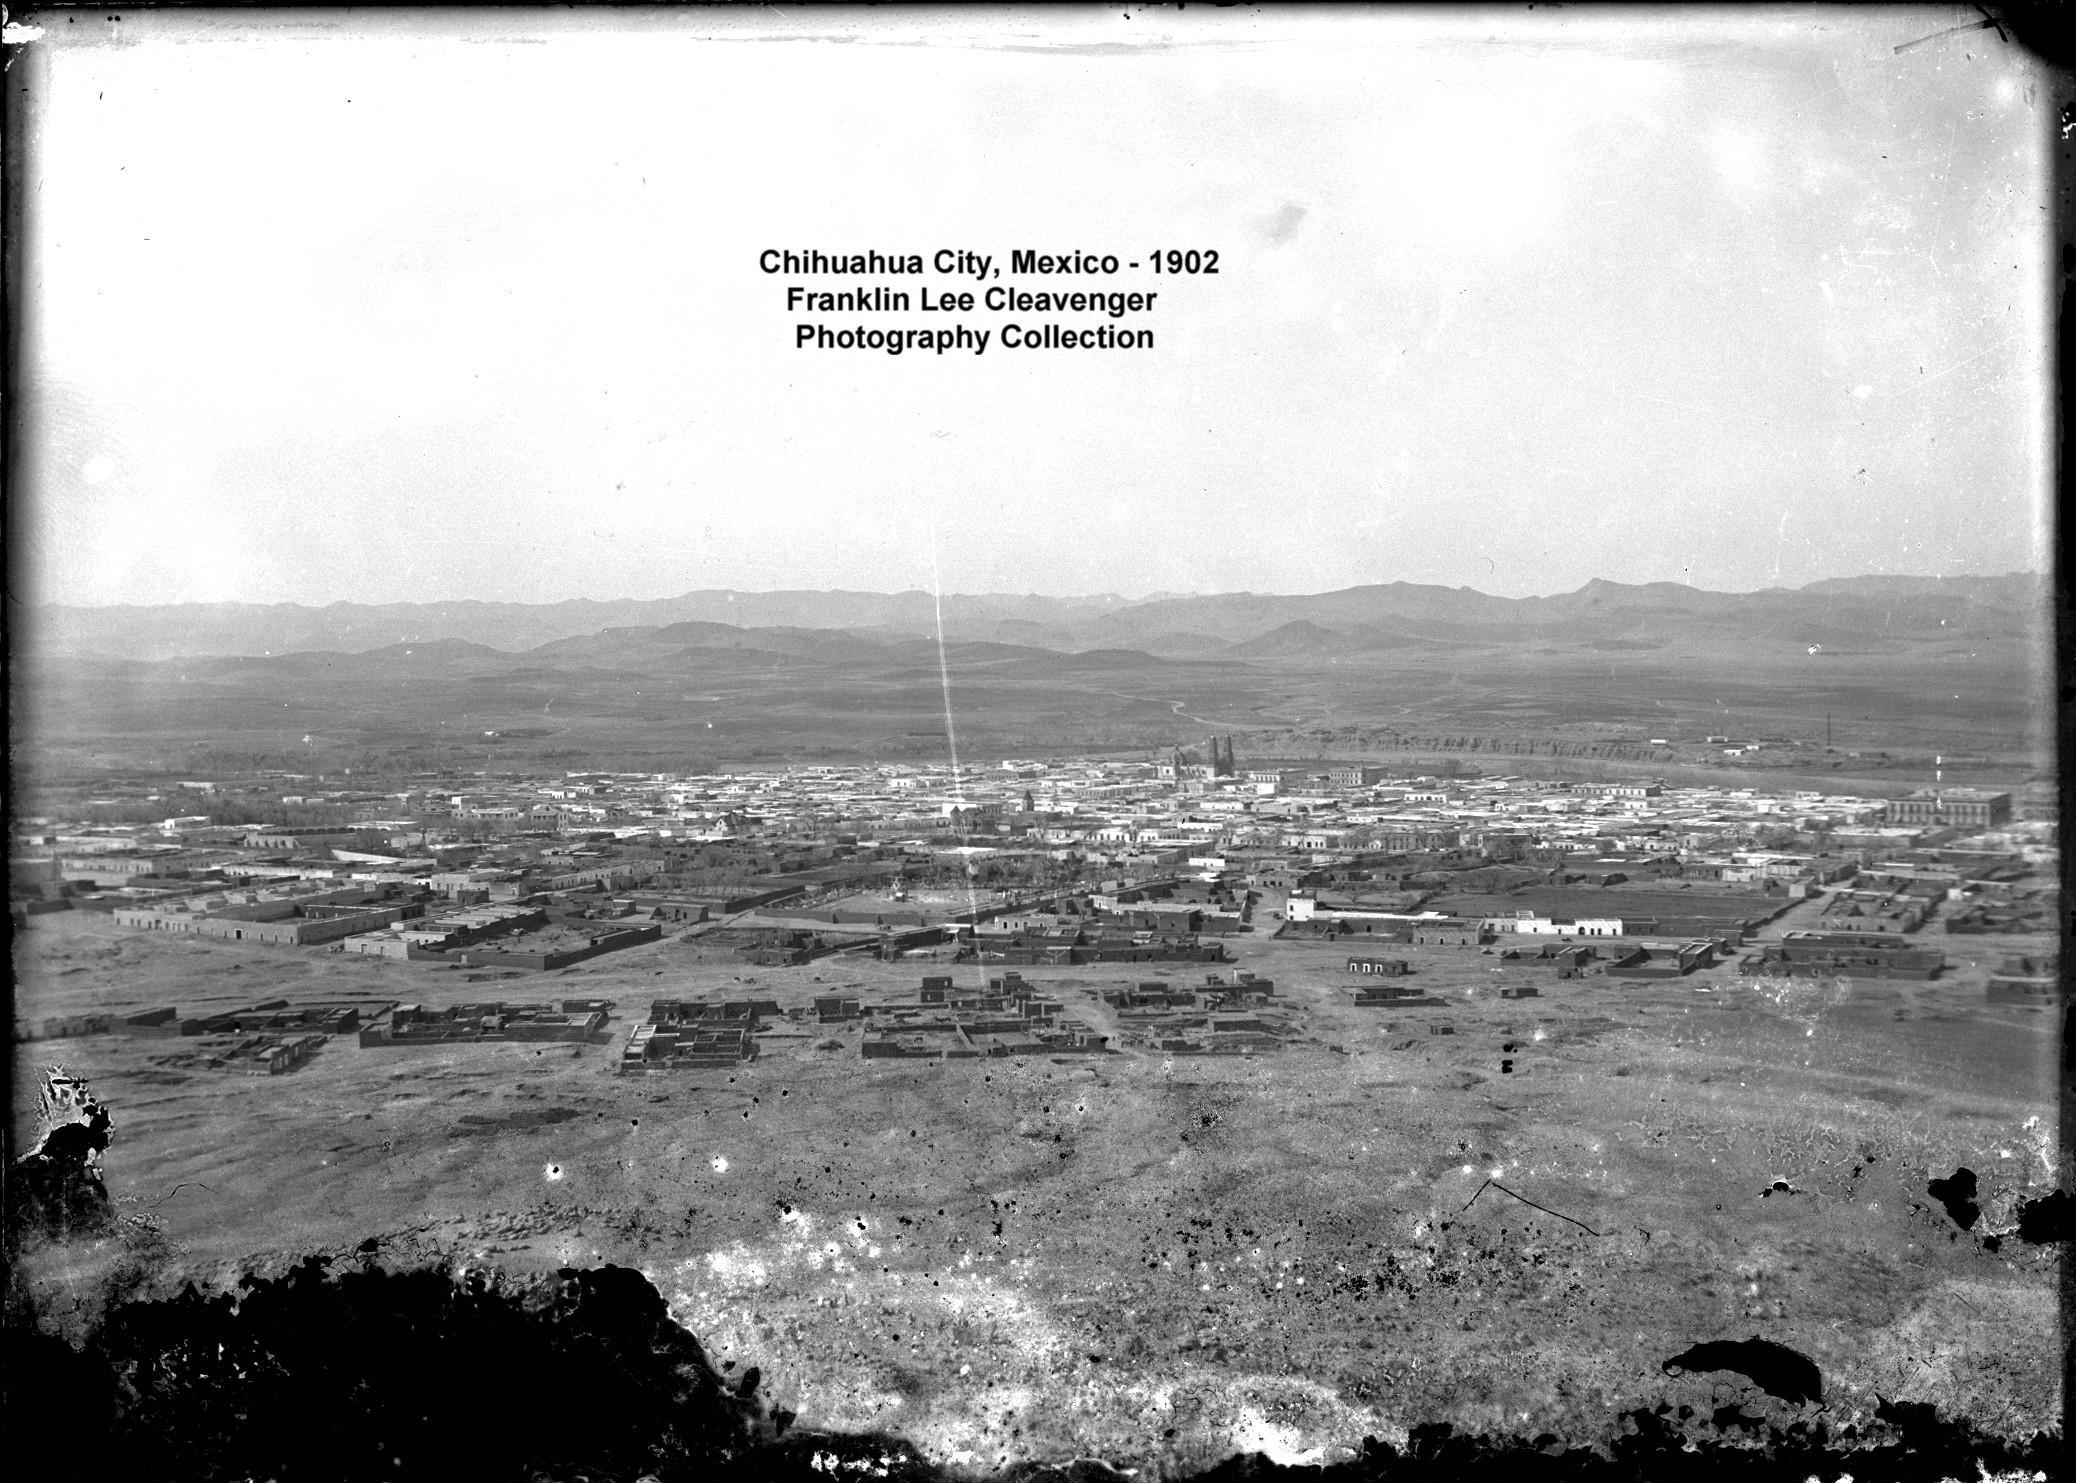 Chihuahua City, Mexico - 1902. Franklin Lee Cleavenger Photography Collection